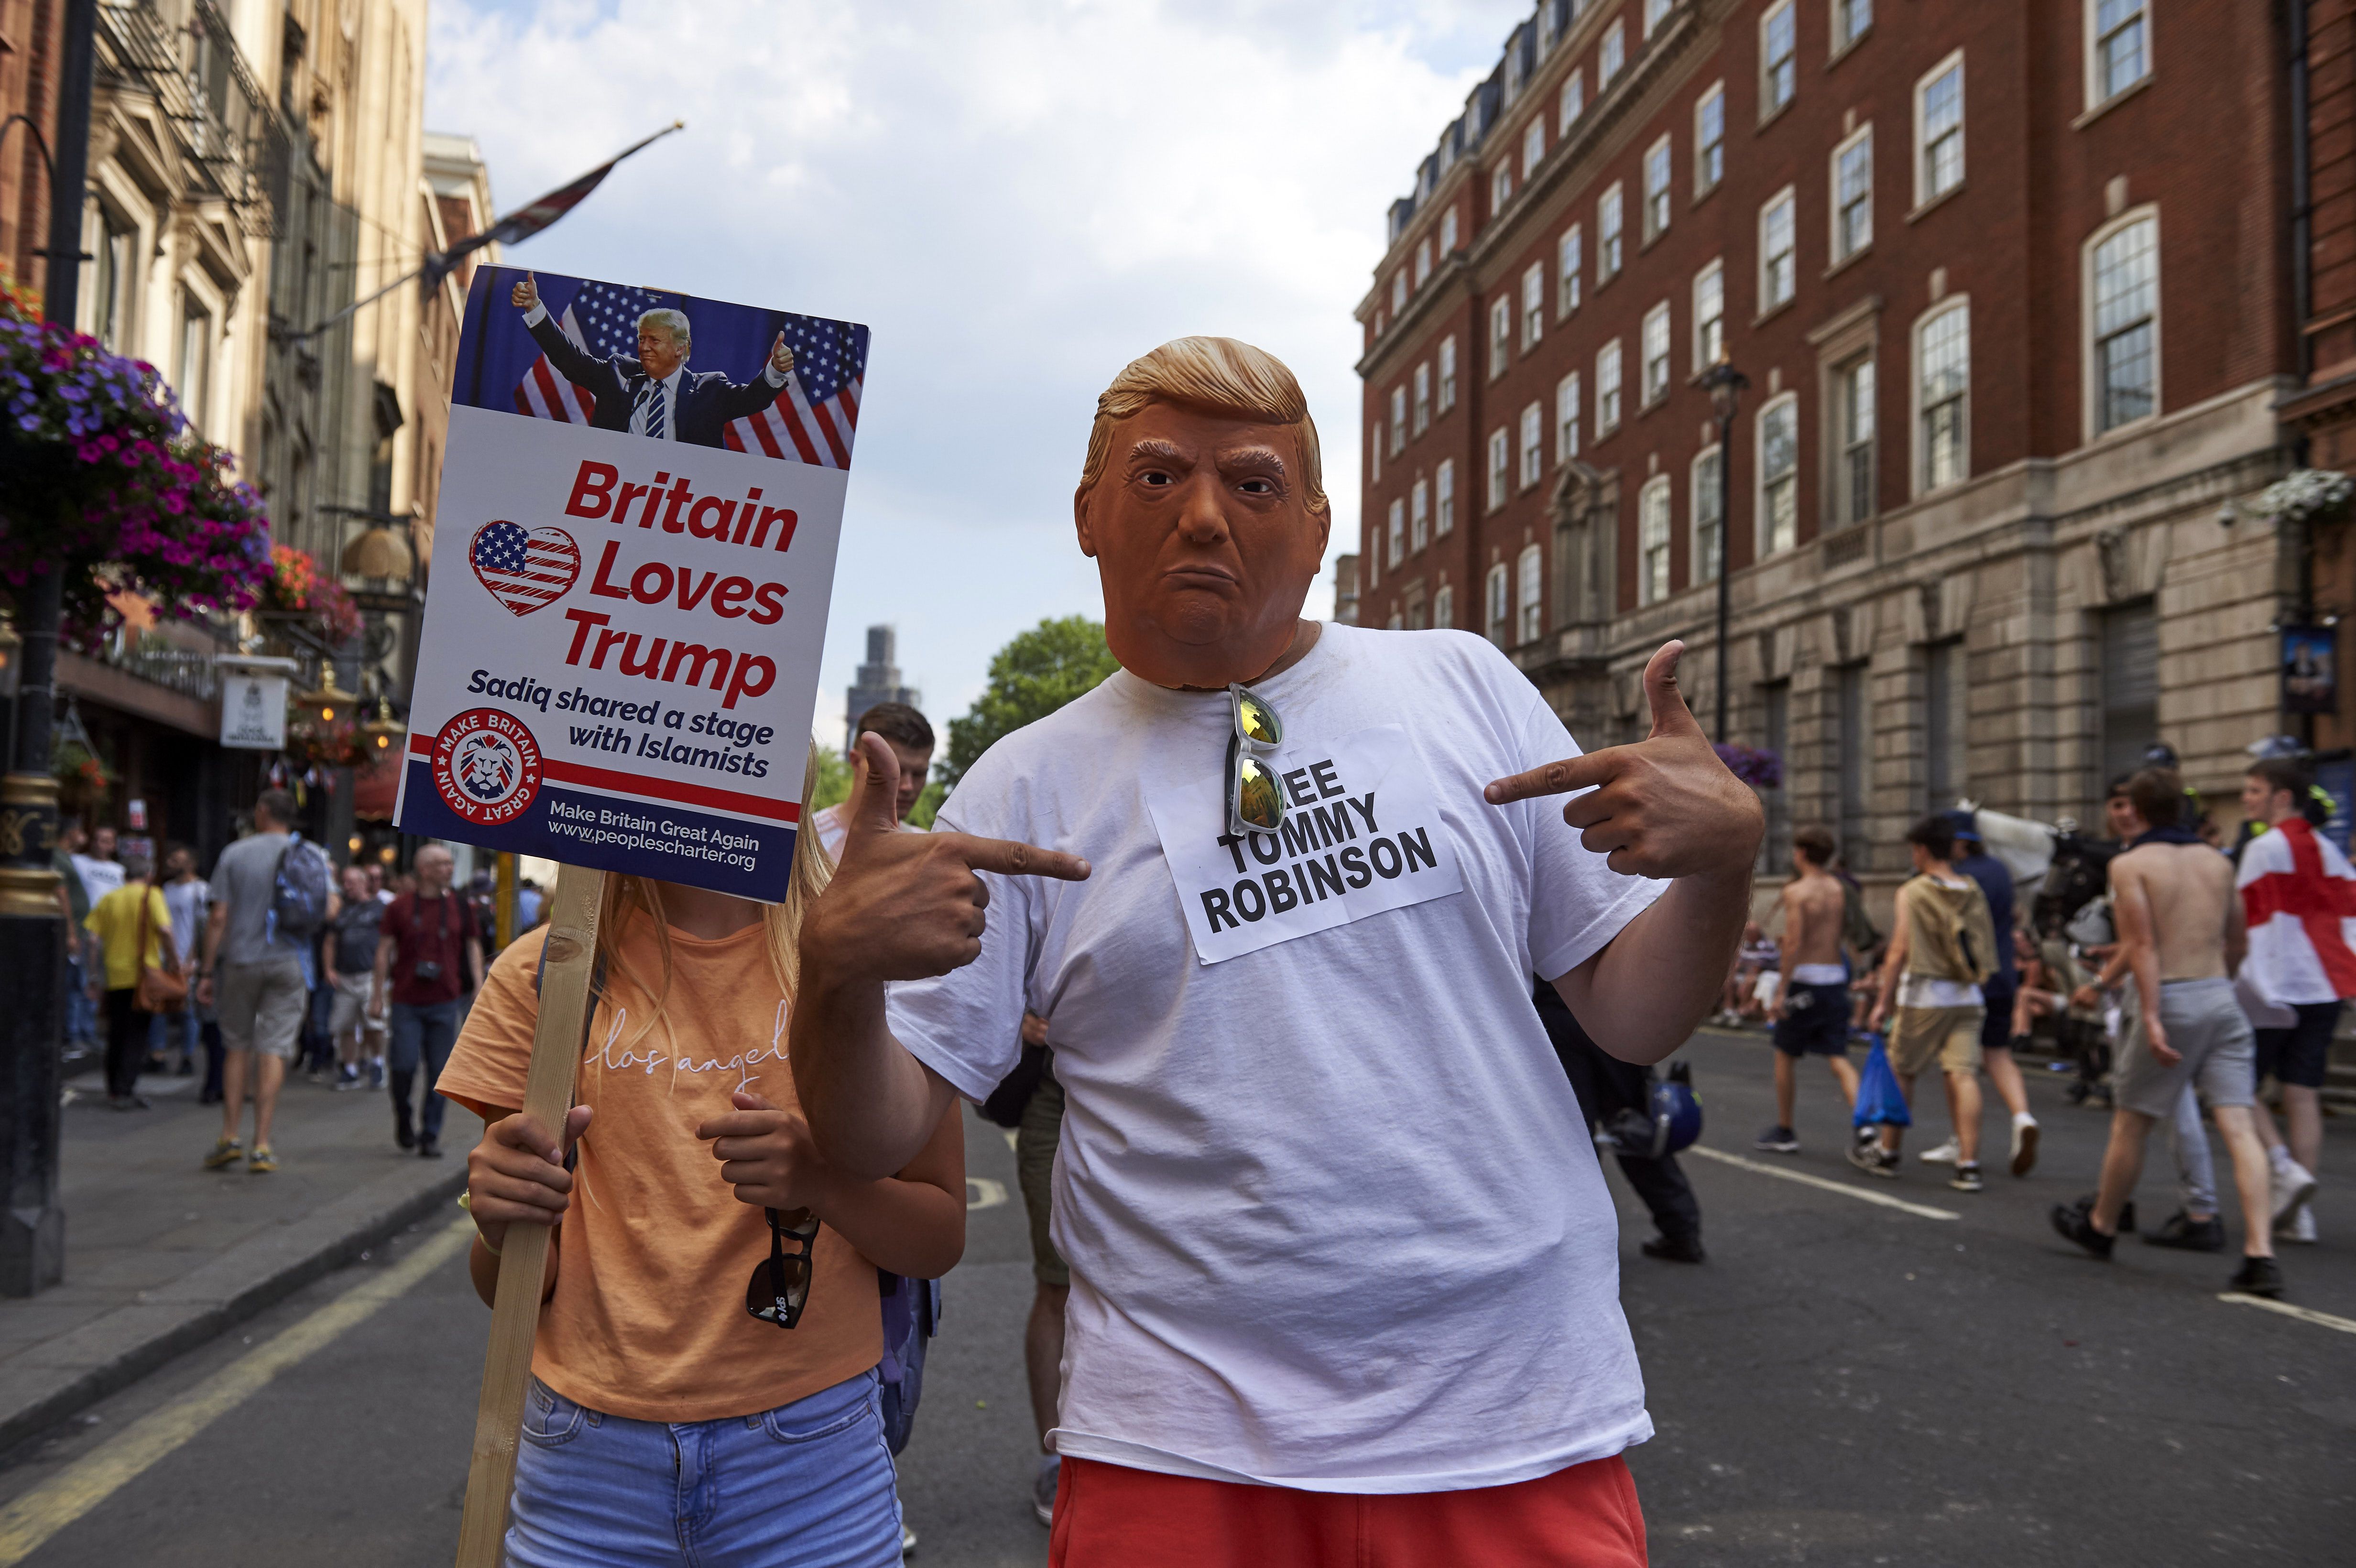 US President Donald Trump supporters pose for the camera as they mix with protesters at a rally by supporters of far-right spokesman Tommy Robinson in Trafalgar Square in central London on July 14, 2018, following the jailing of Tommy Robinson for contempt of court. (Photo by Niklas HALLE'N / AFP) (Photo credit should read NIKLAS HALLE'N/AFP/Getty Images)